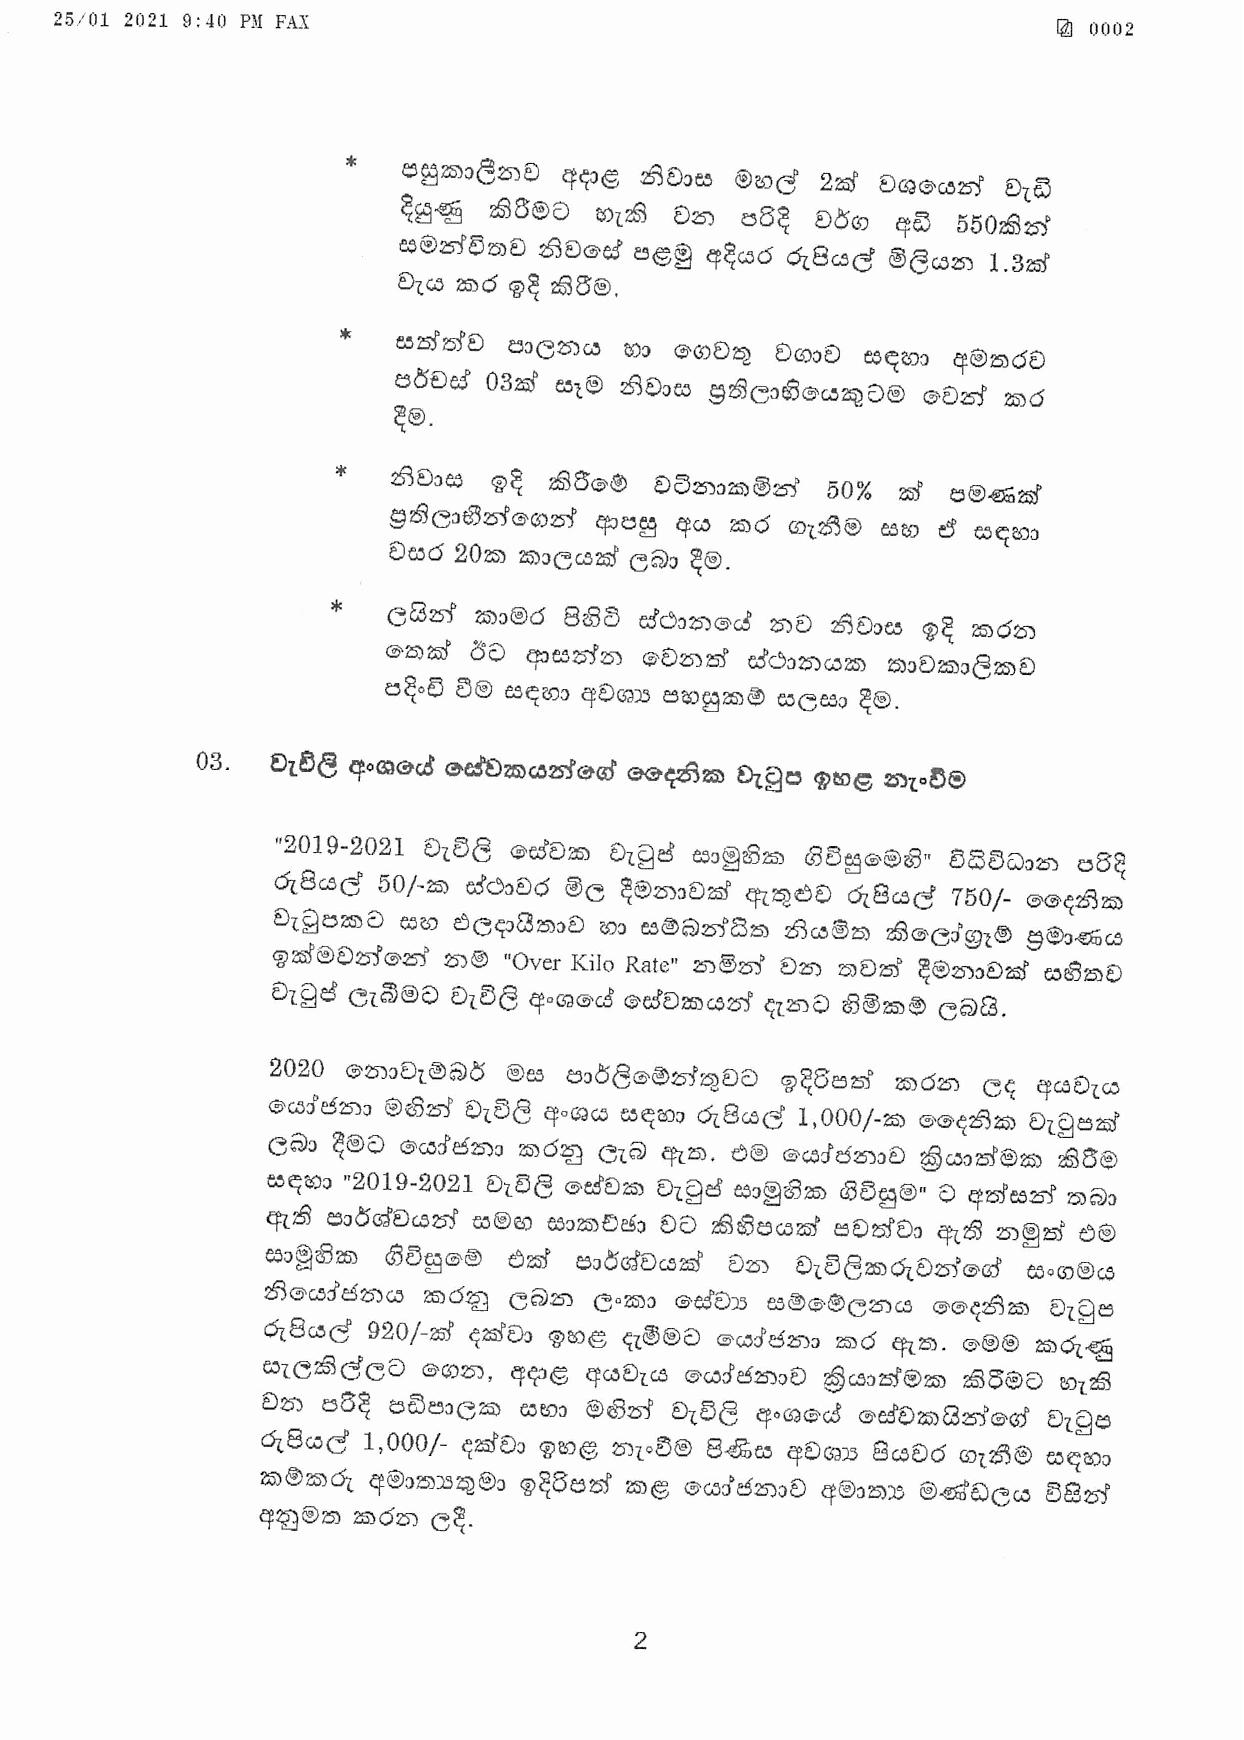 Cabinet Decision on 25.01.2021 1 page 002